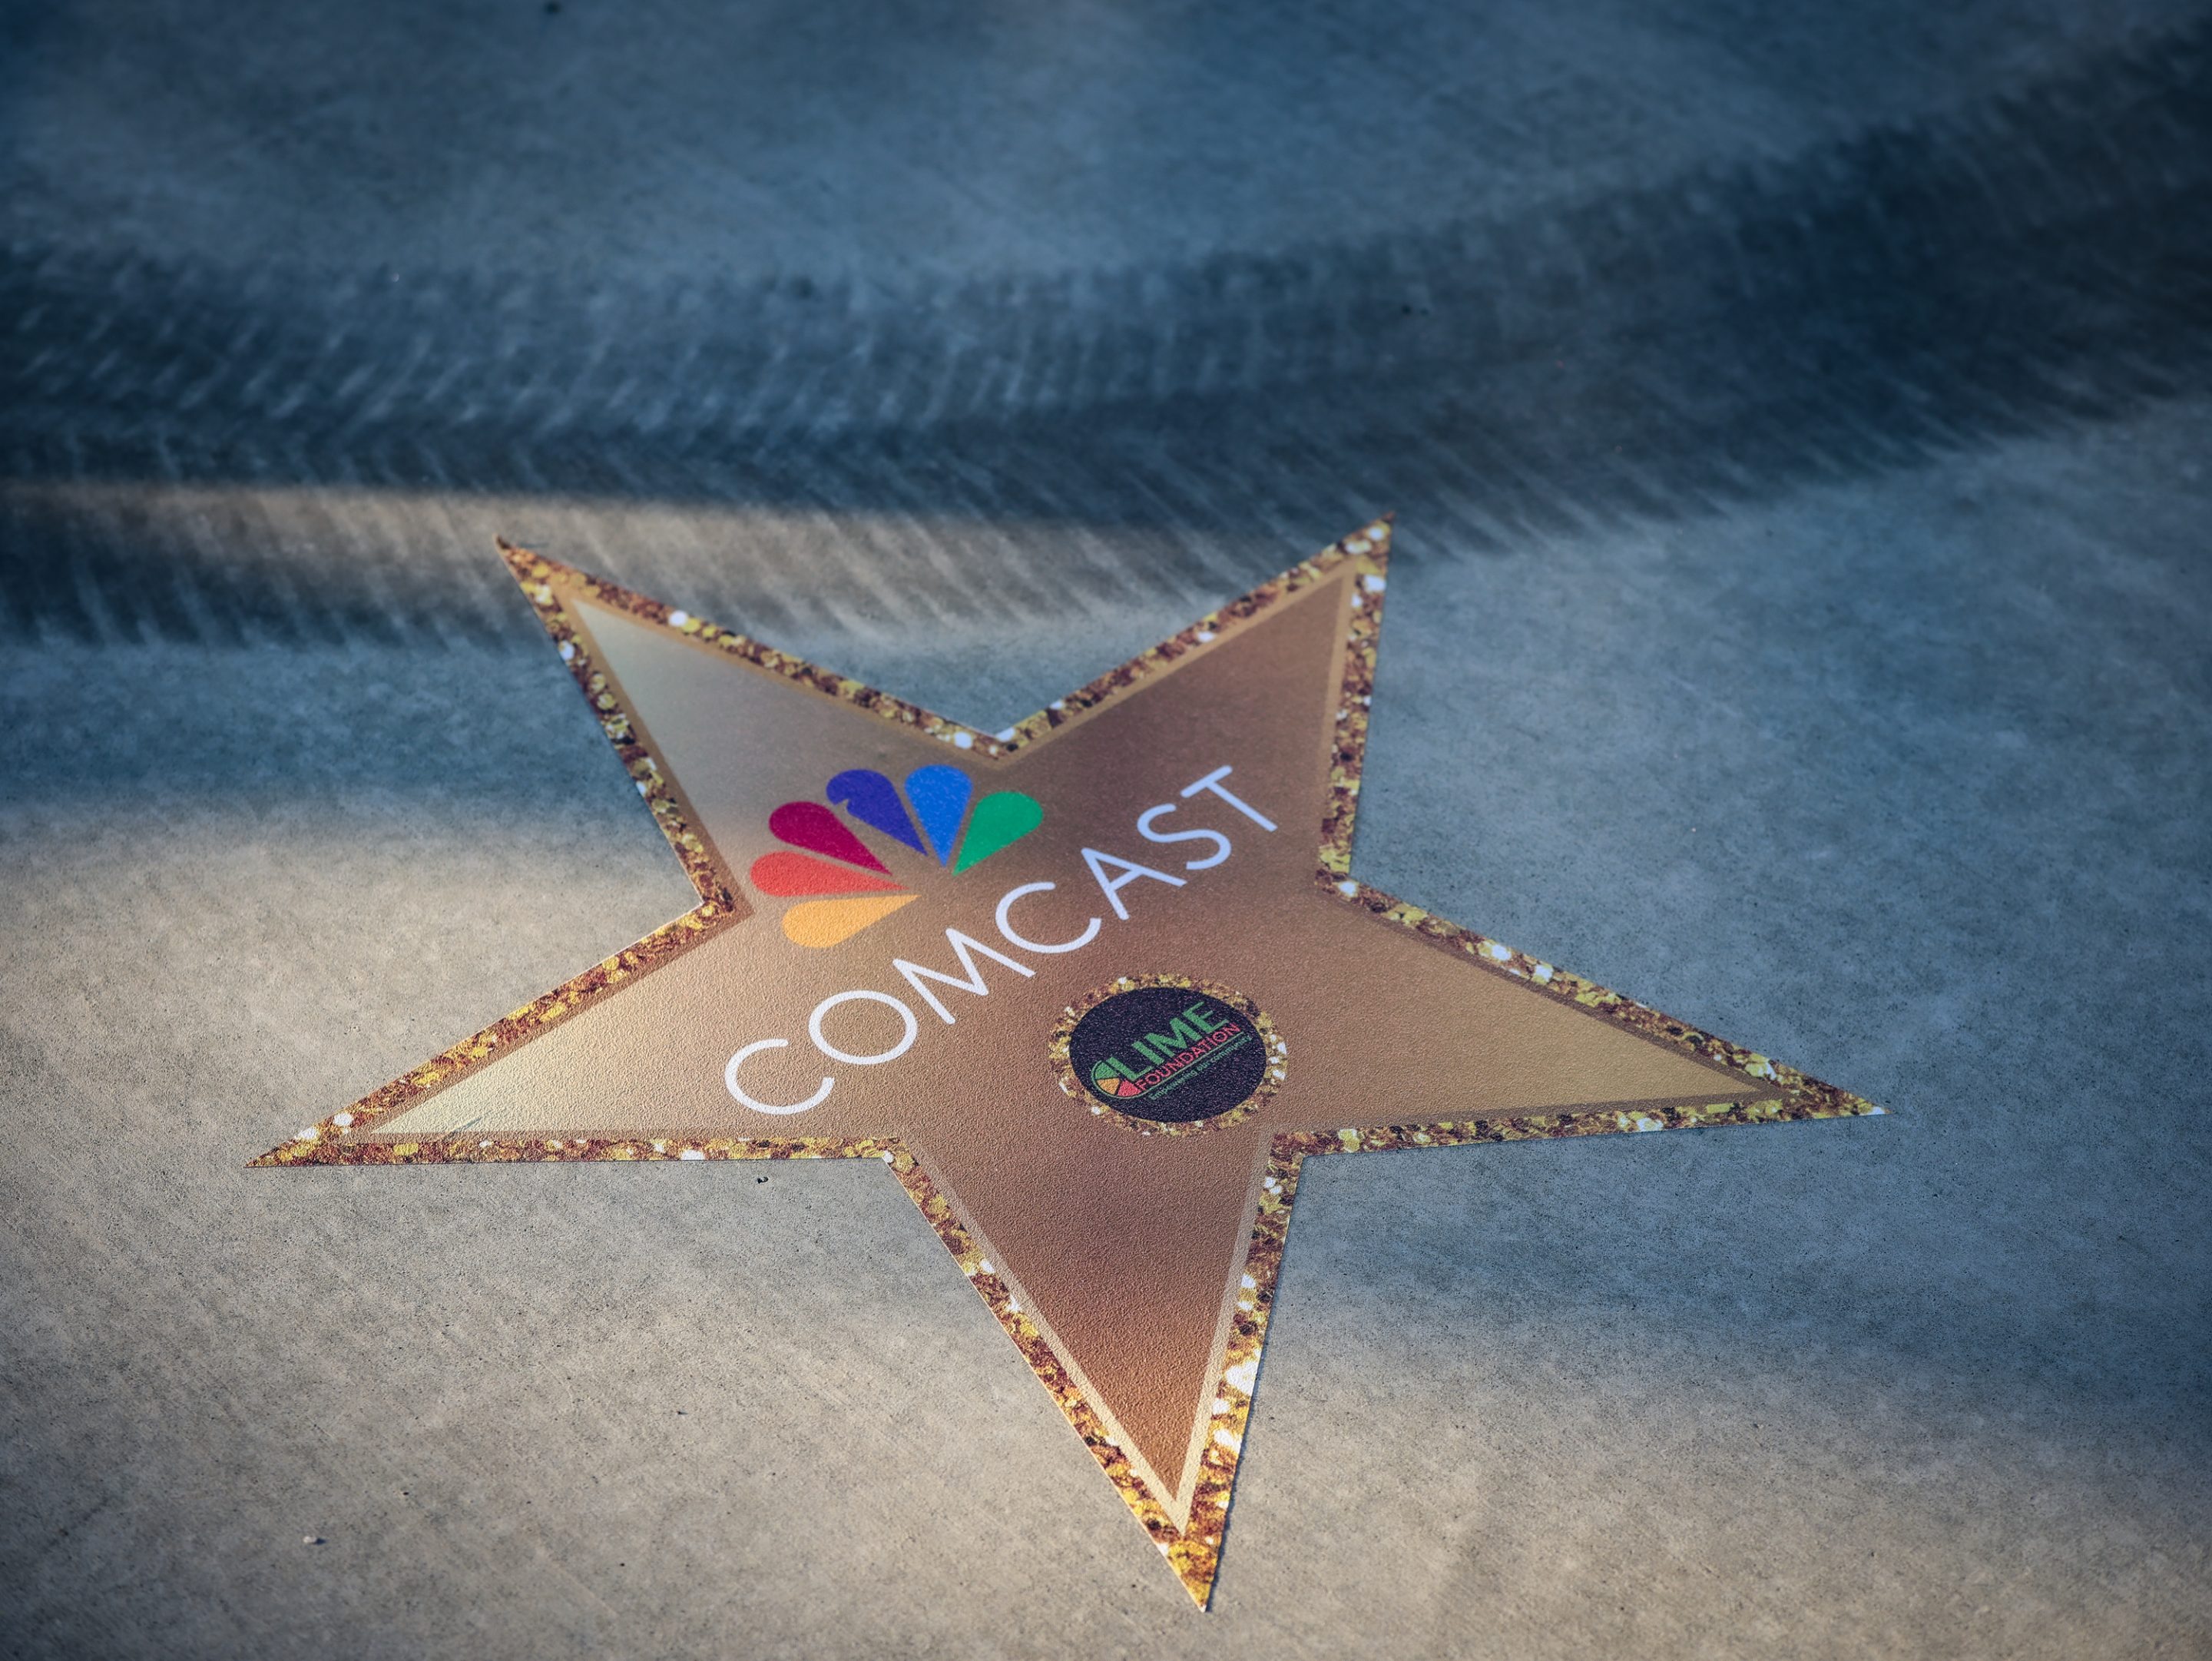 A gold star with the Comcast logo, sponsored by The LIME Foundation of Santa Rosa.